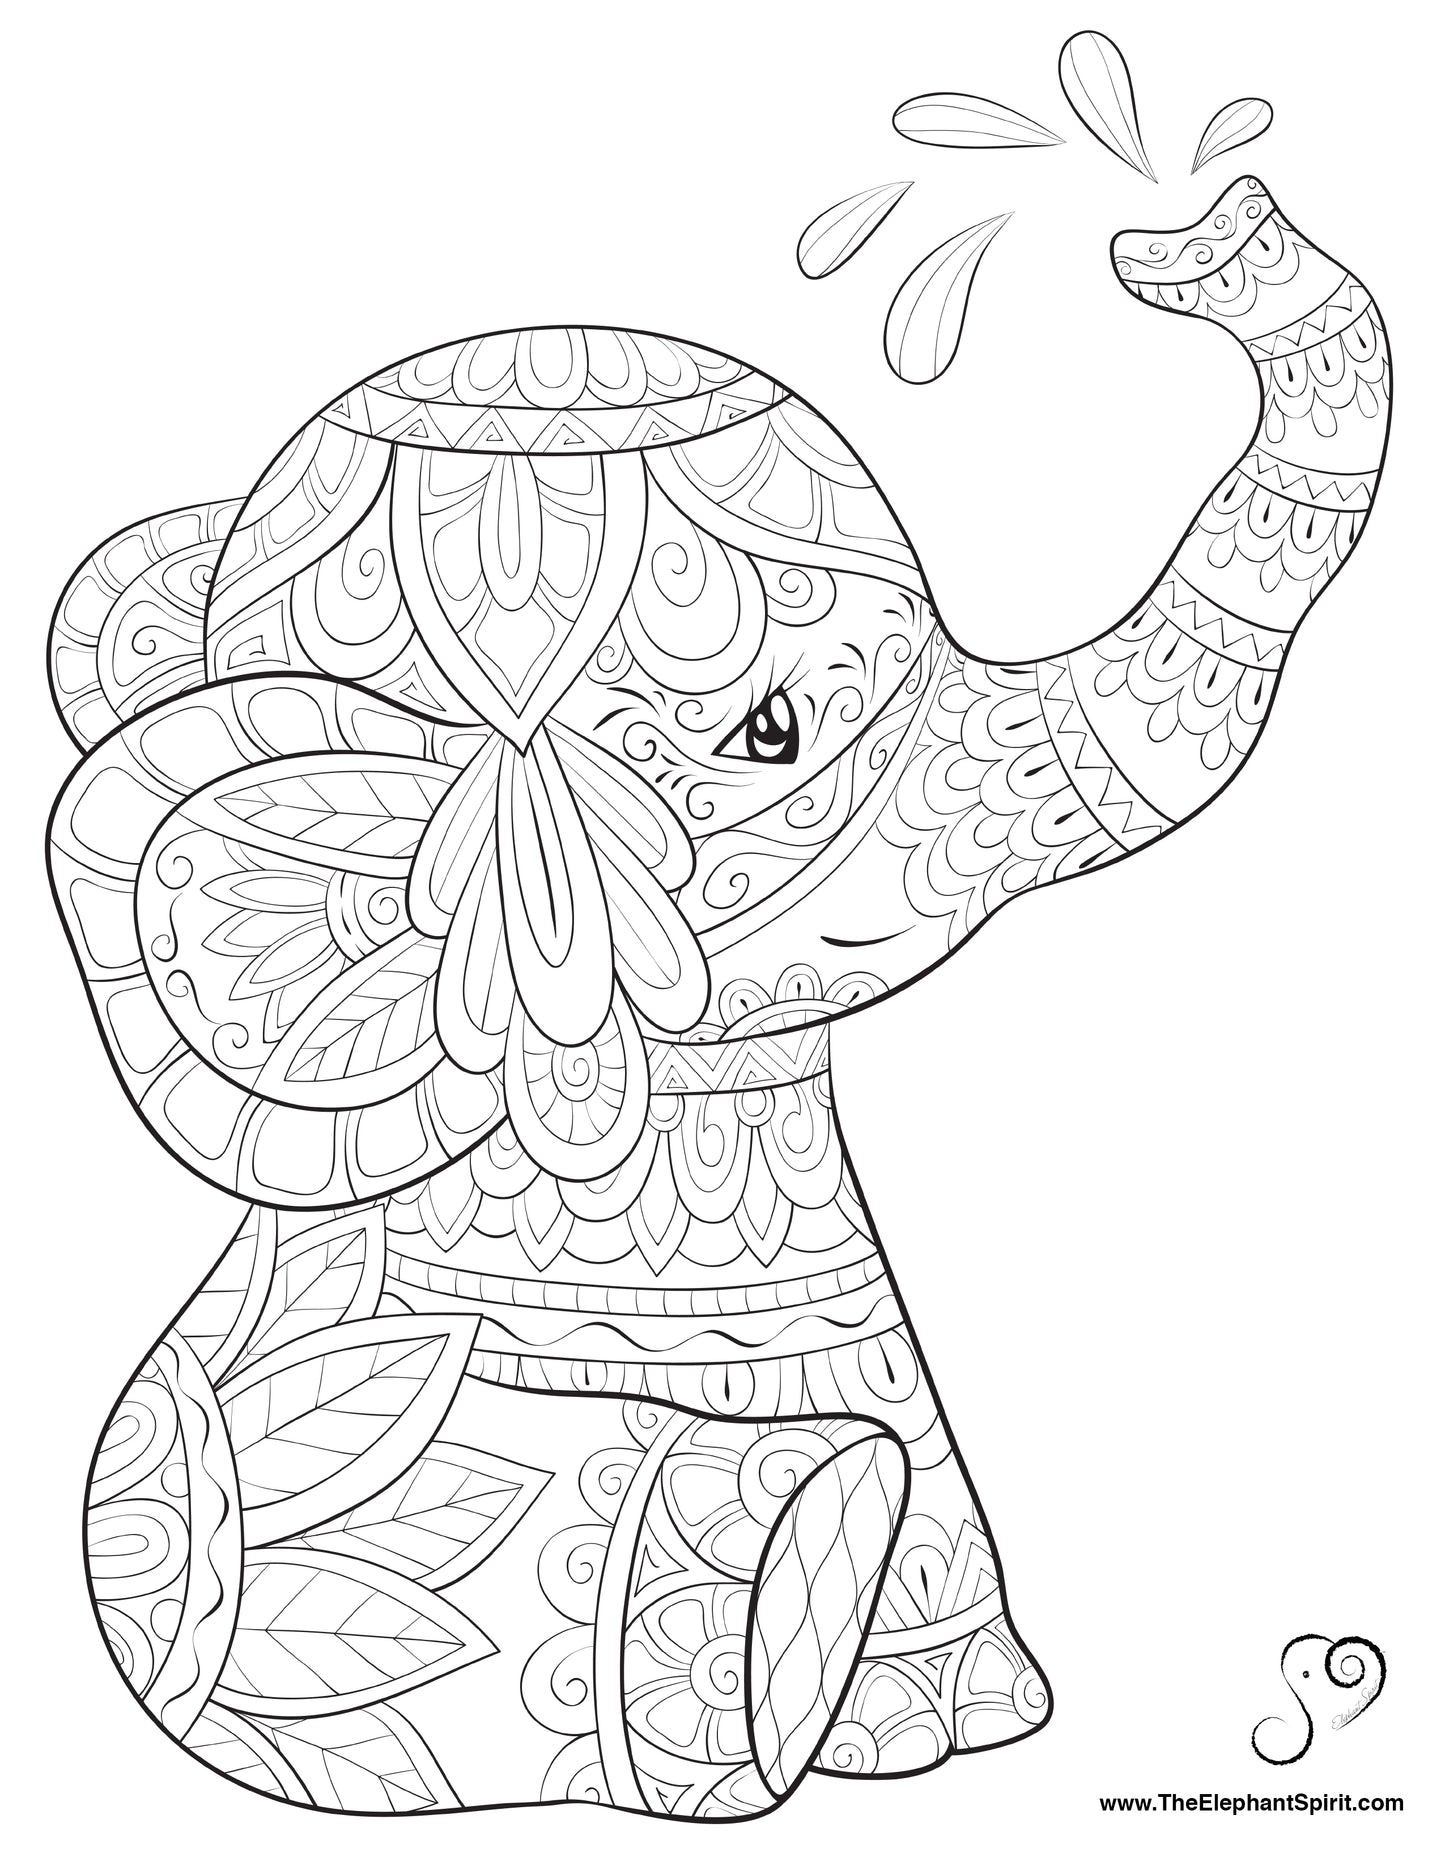 FREE Coloring Page 09-29